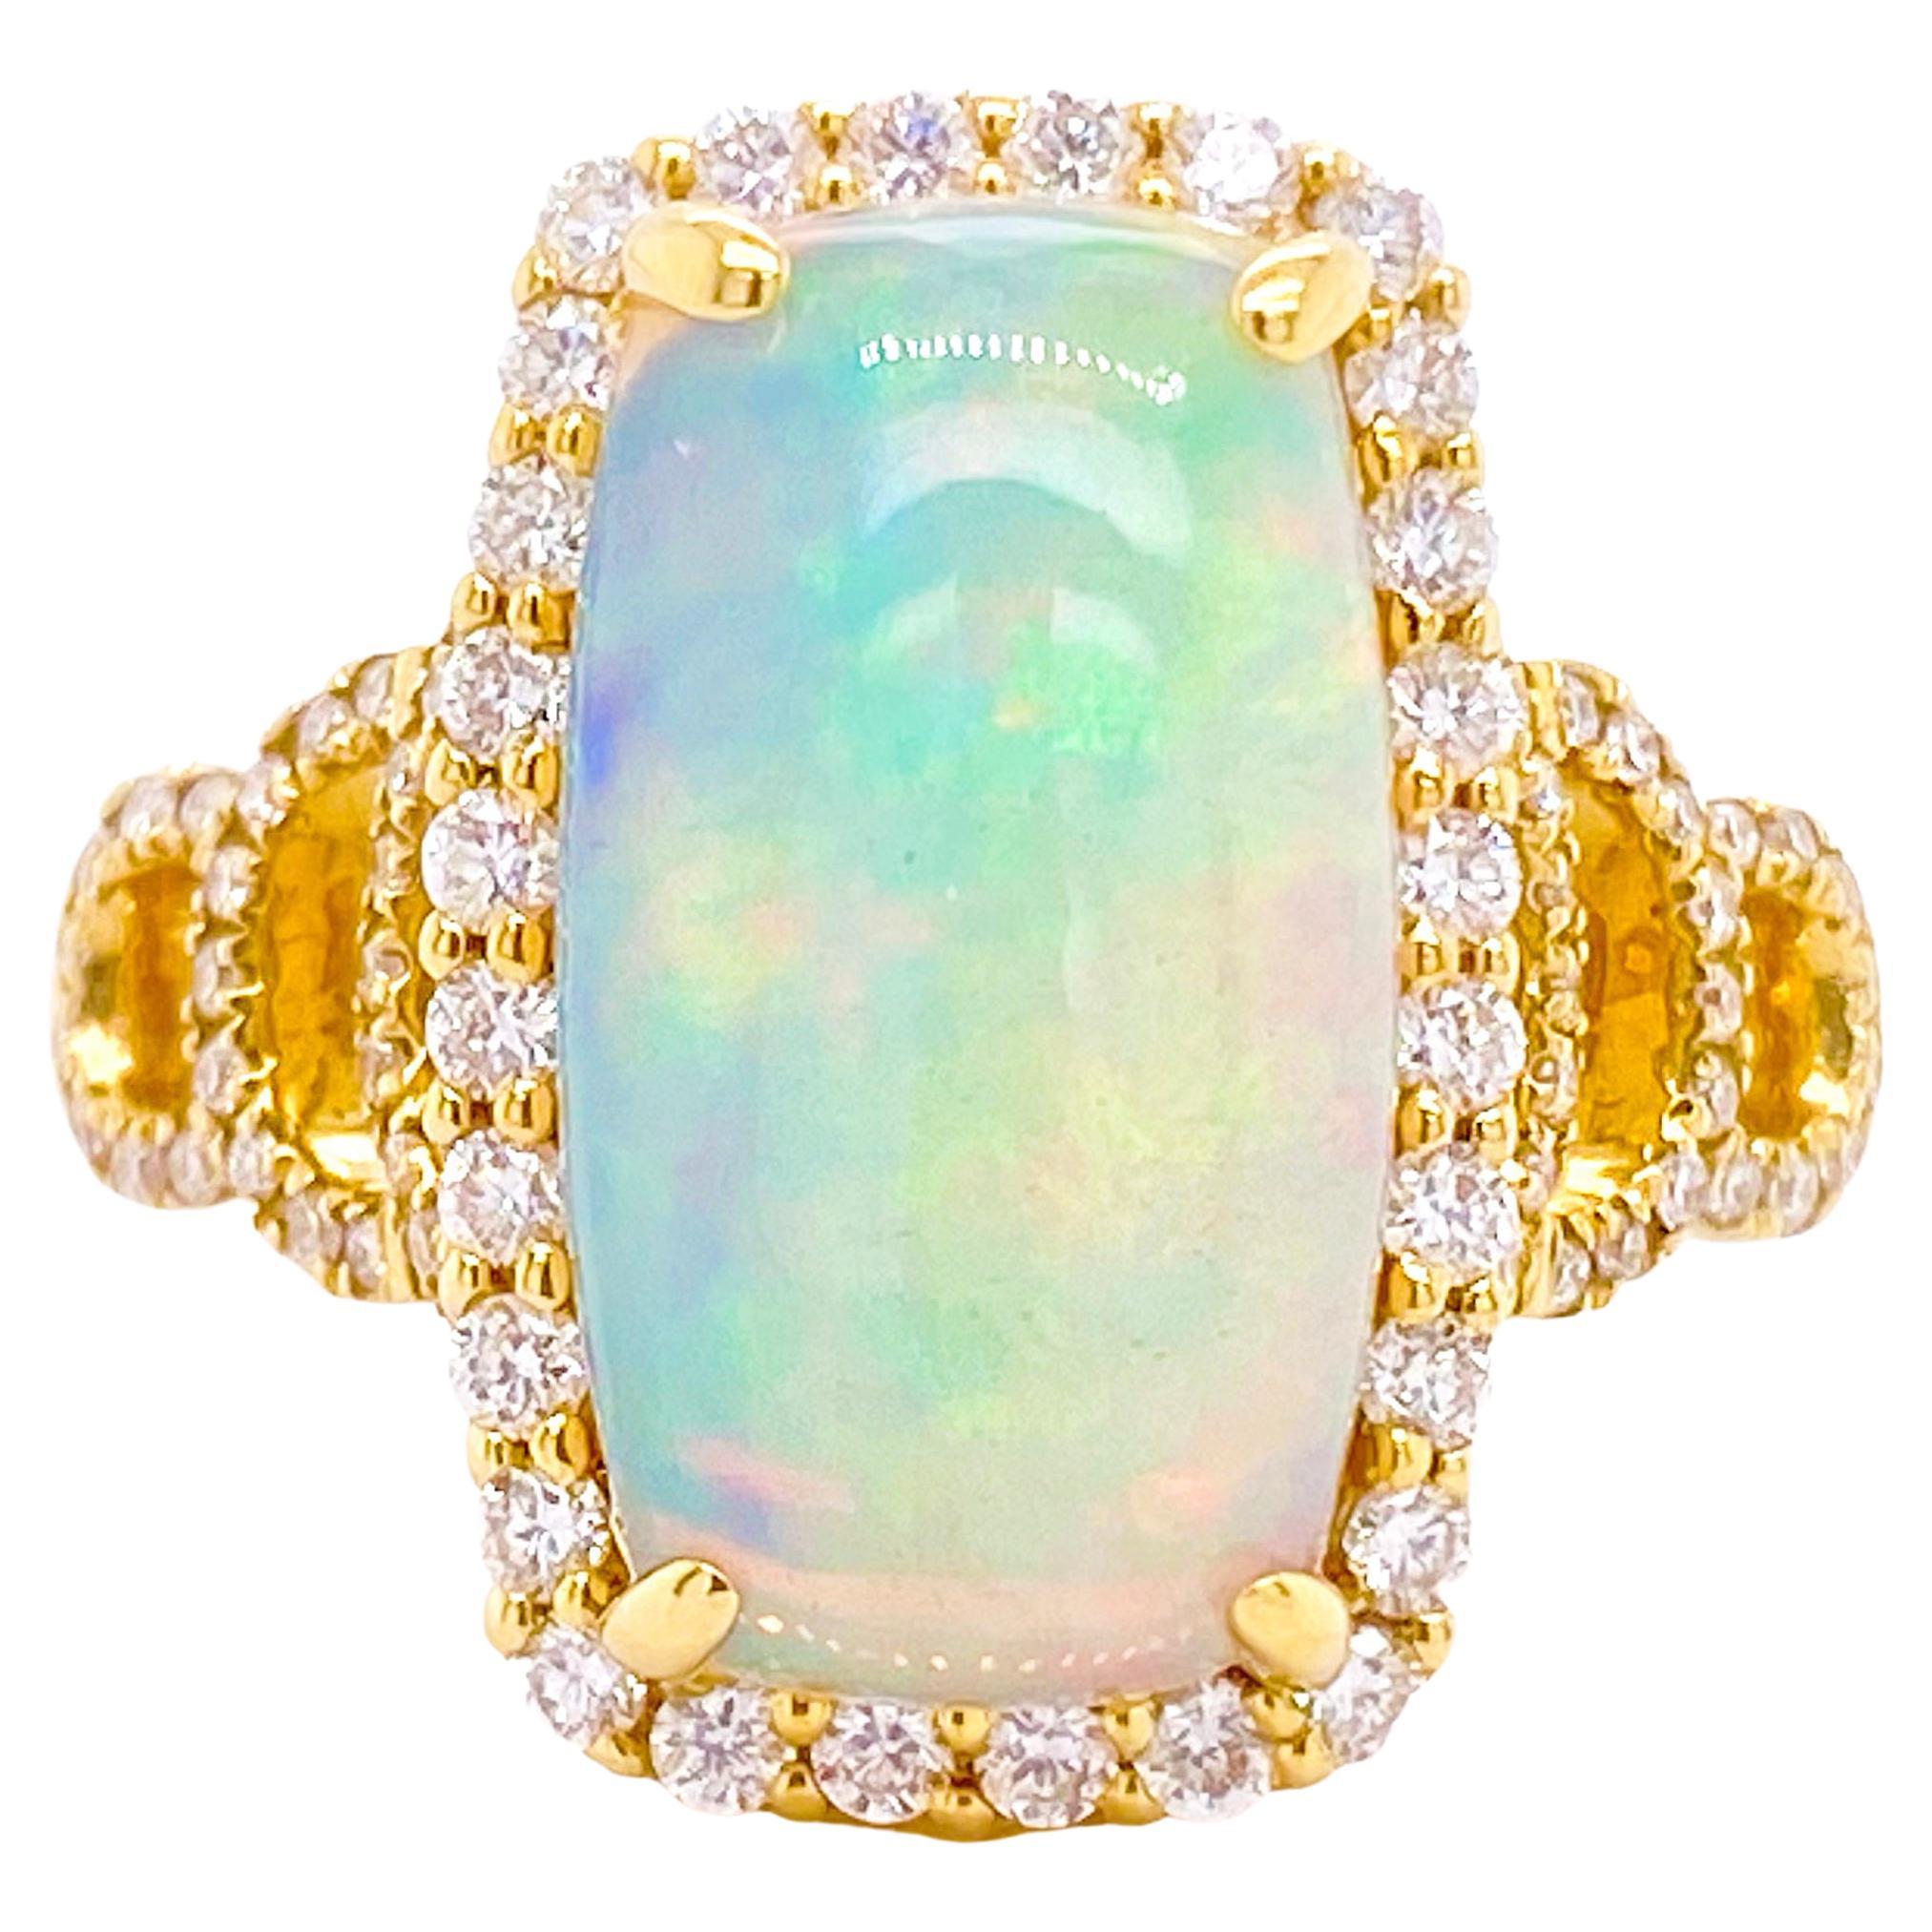 Diamond Opal Ring, Yellow Gold, 3.4ct Cushion Opal with Diamond Halo, 18 Kt Gold For Sale